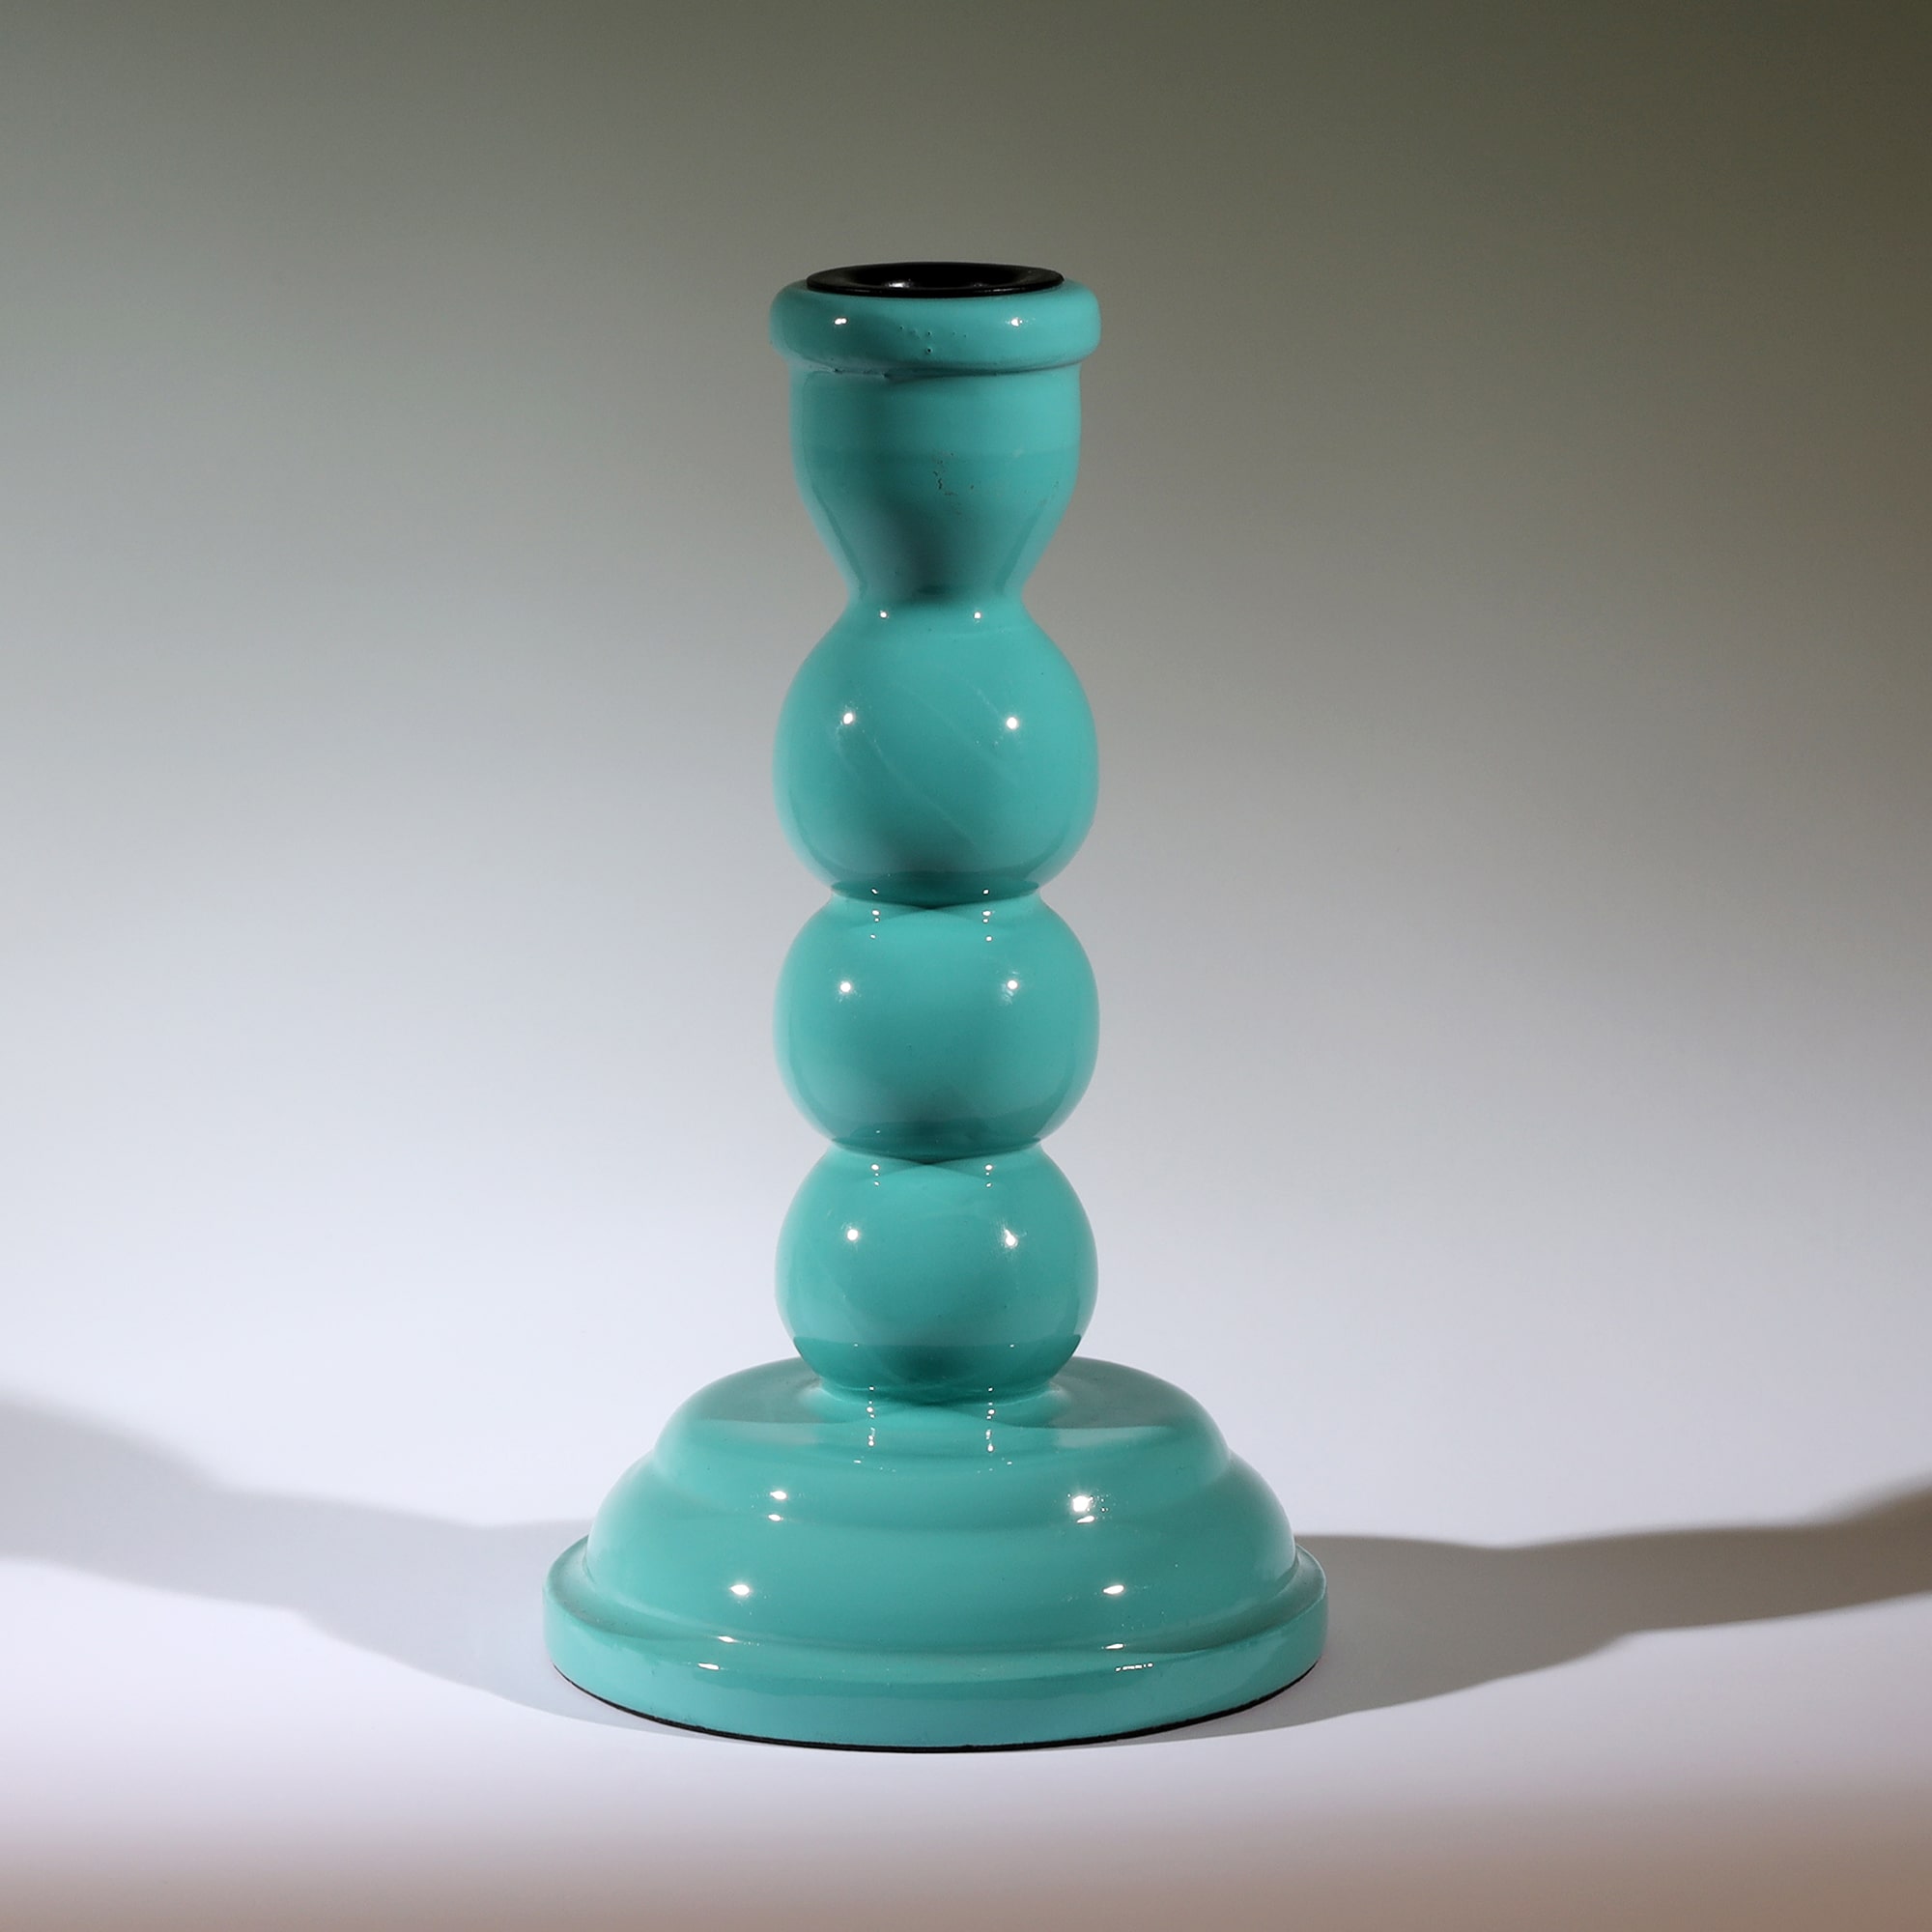 Turquoise Polished Lacquer Candle holder,it is shaped like three solid circles on top of a tapered base